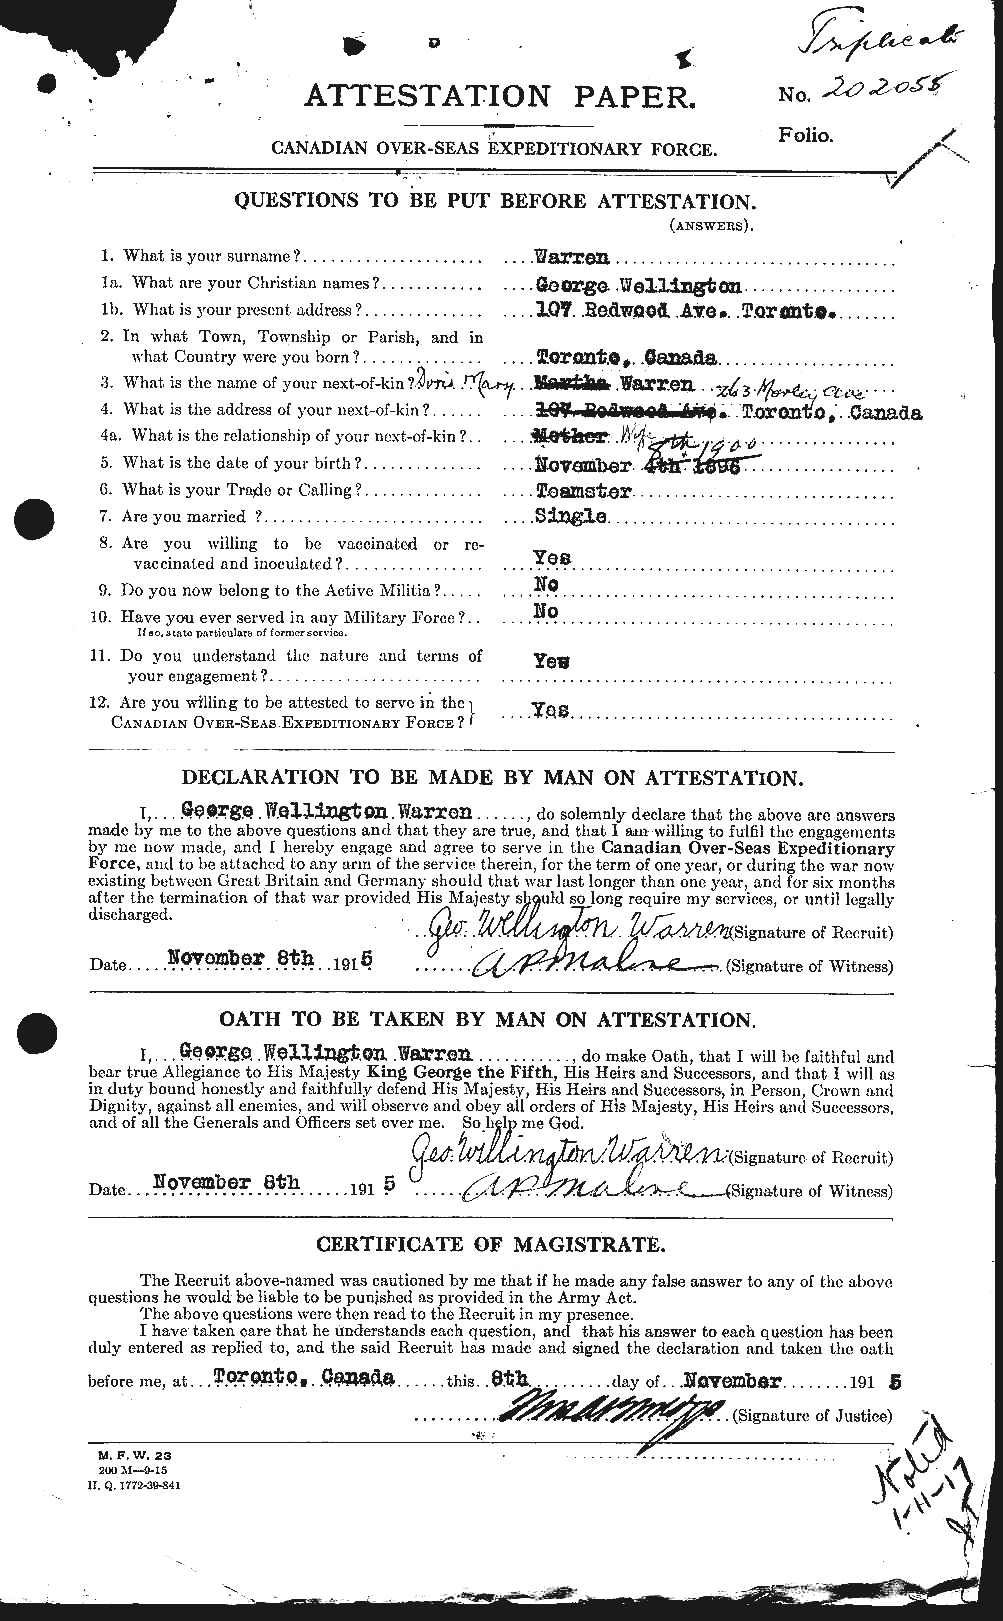 Personnel Records of the First World War - CEF 658473a